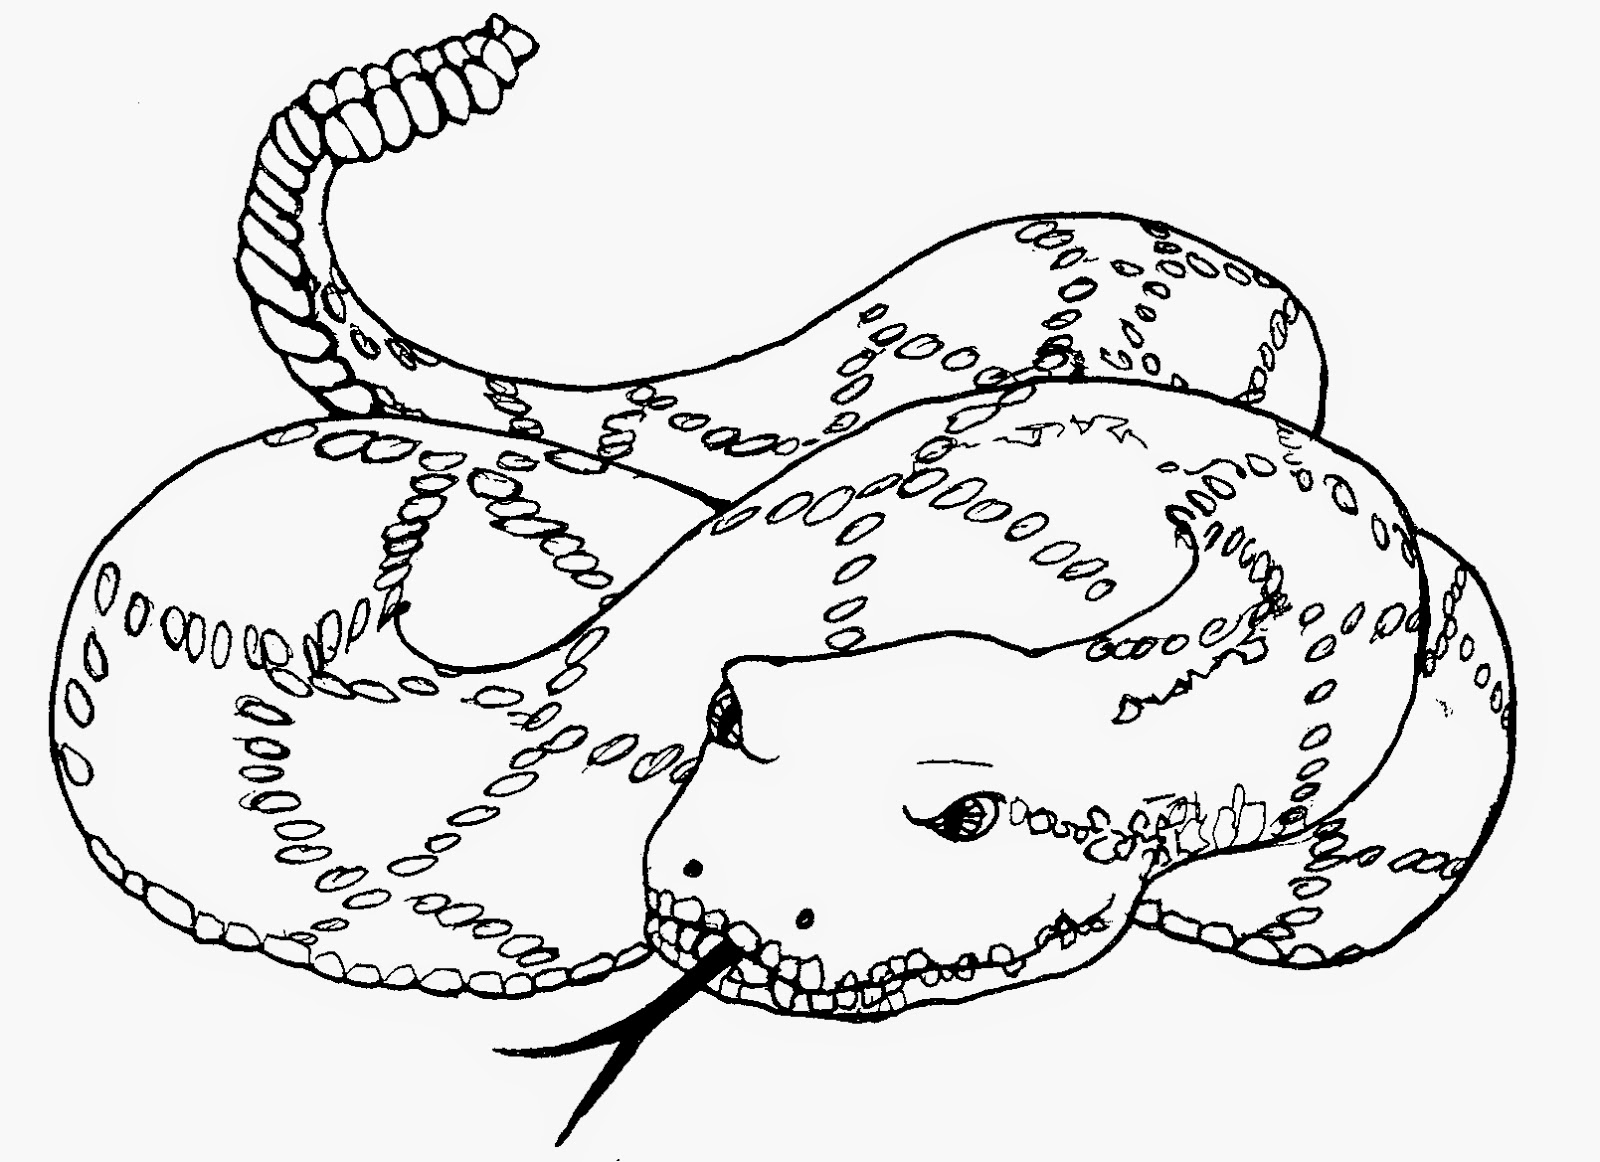 Download Coloring Pages: Snakes Coloring Pages Free and Printable